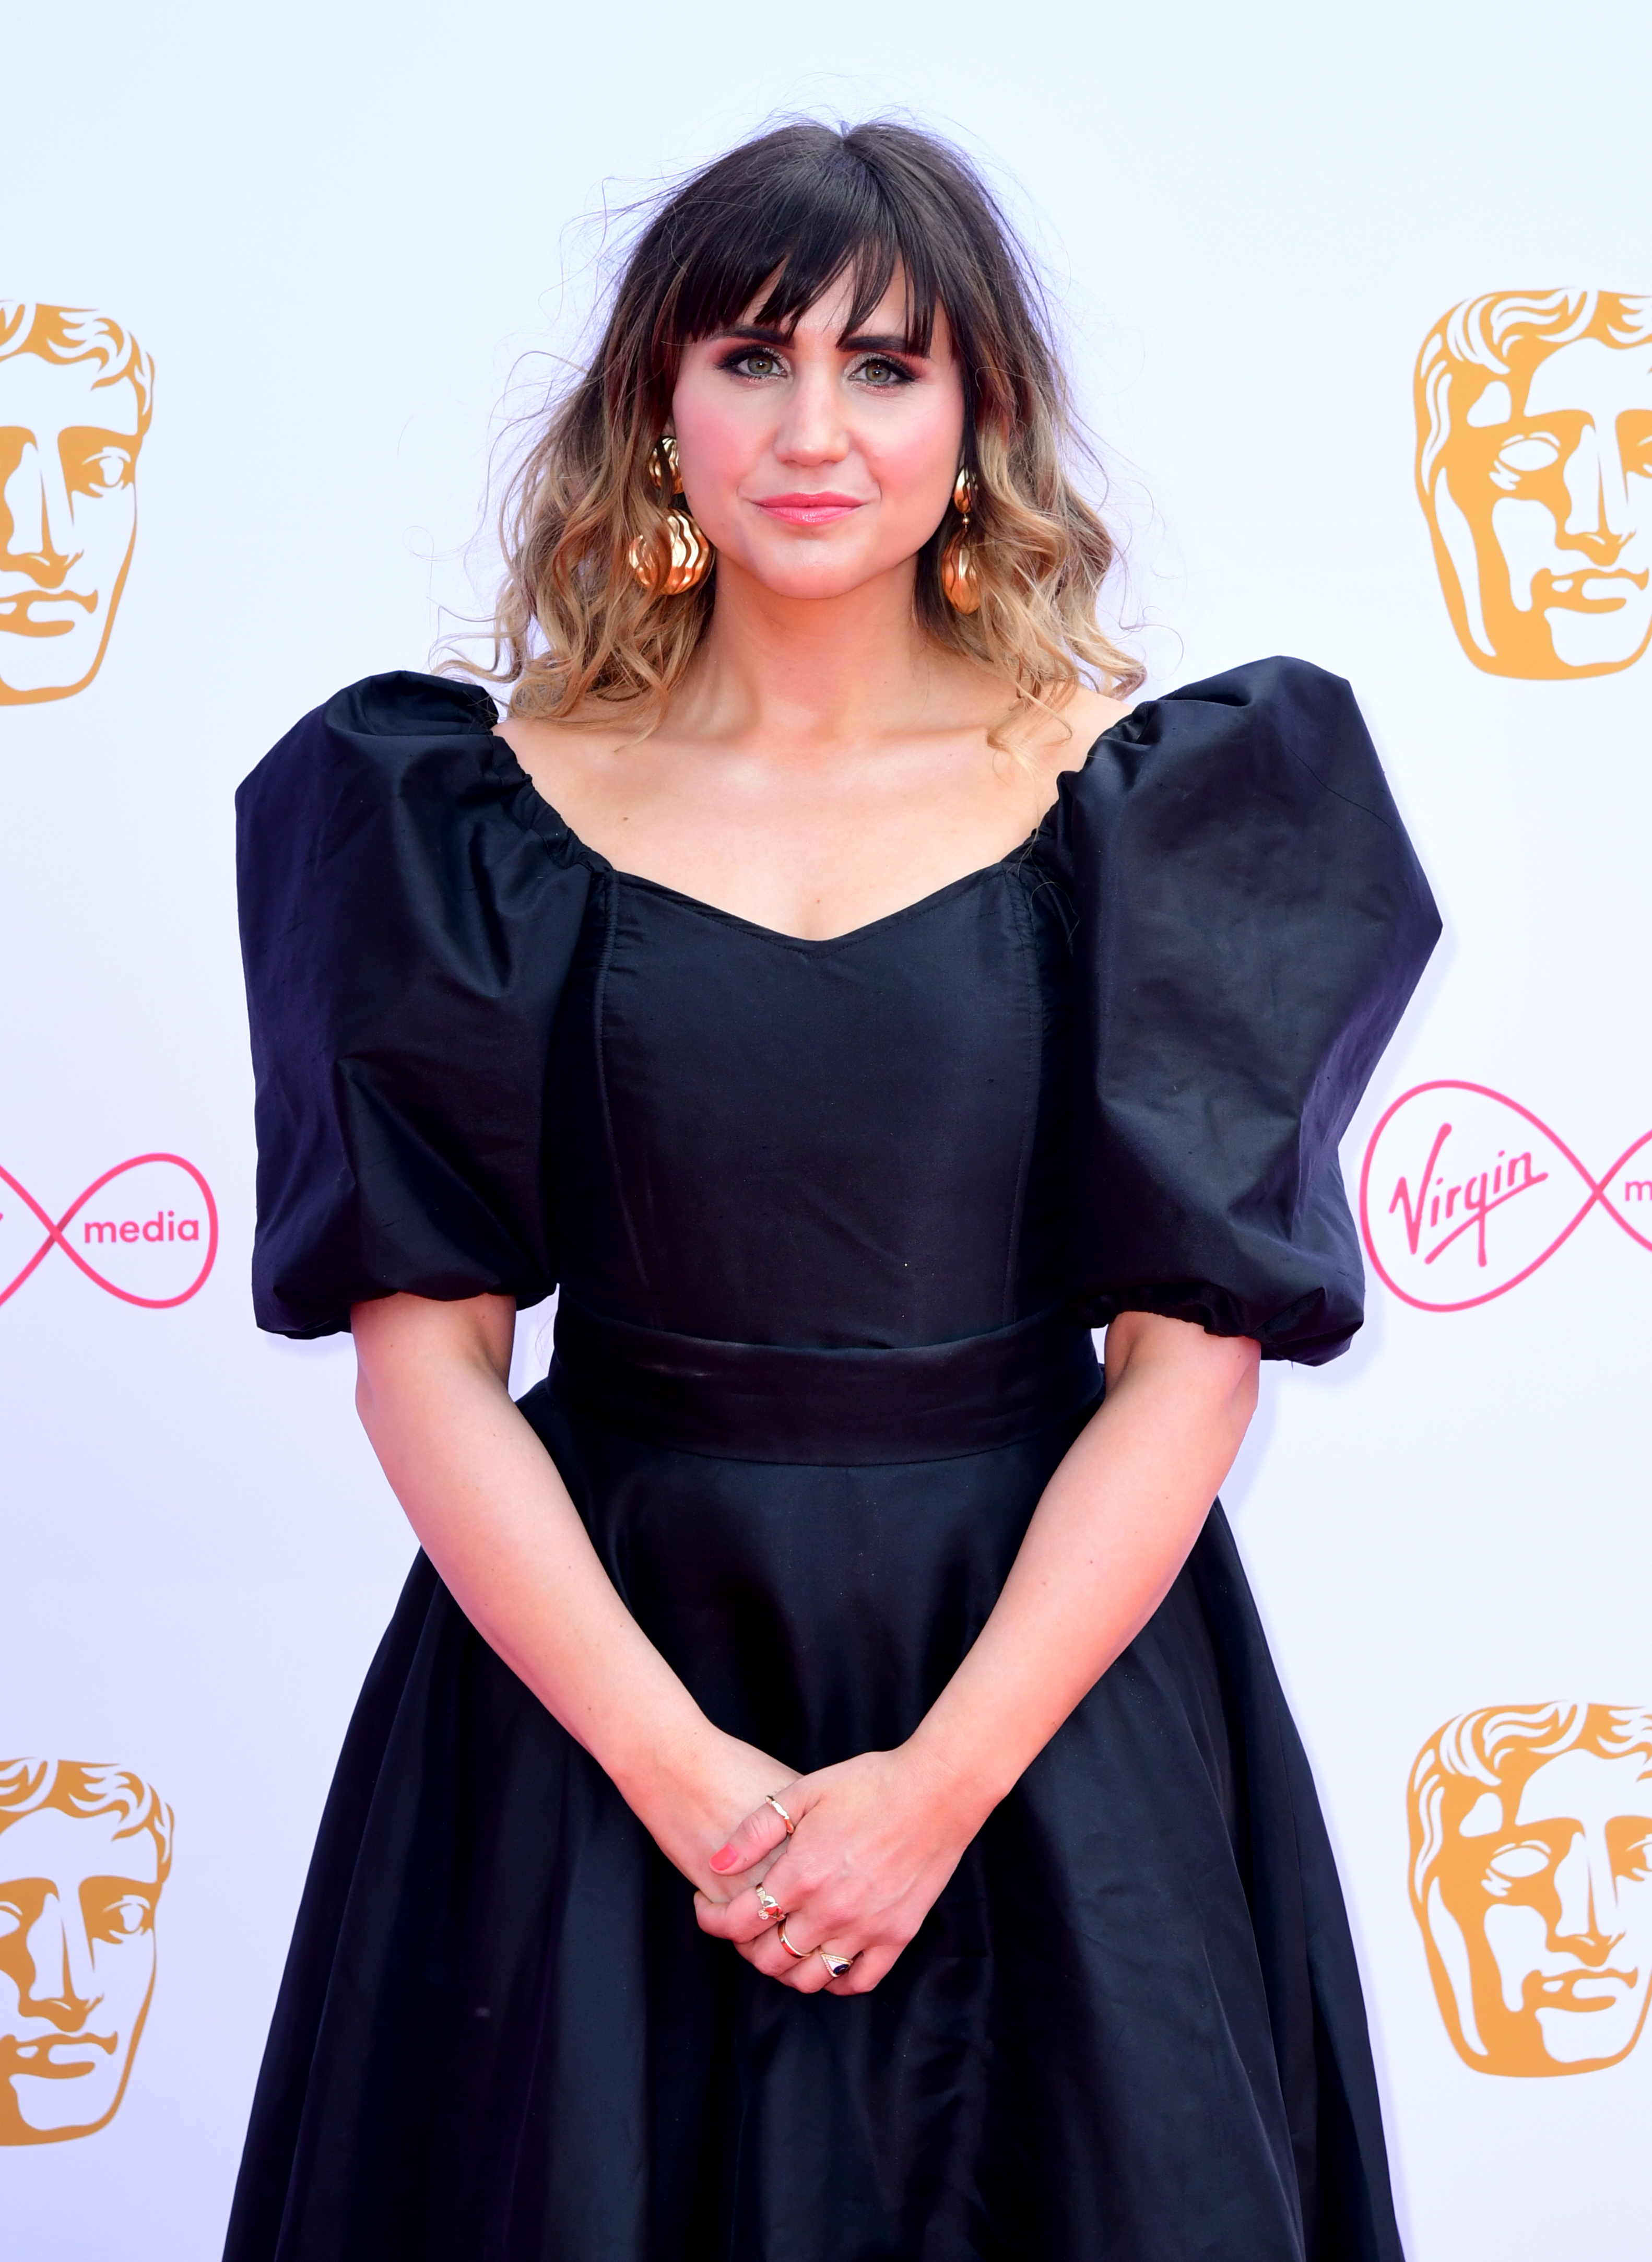 Natasia Demetriou attend the Virgin Media BAFTA TV awards at the Royal Festival Hall in May 2019 in London. | Source: Getty Images